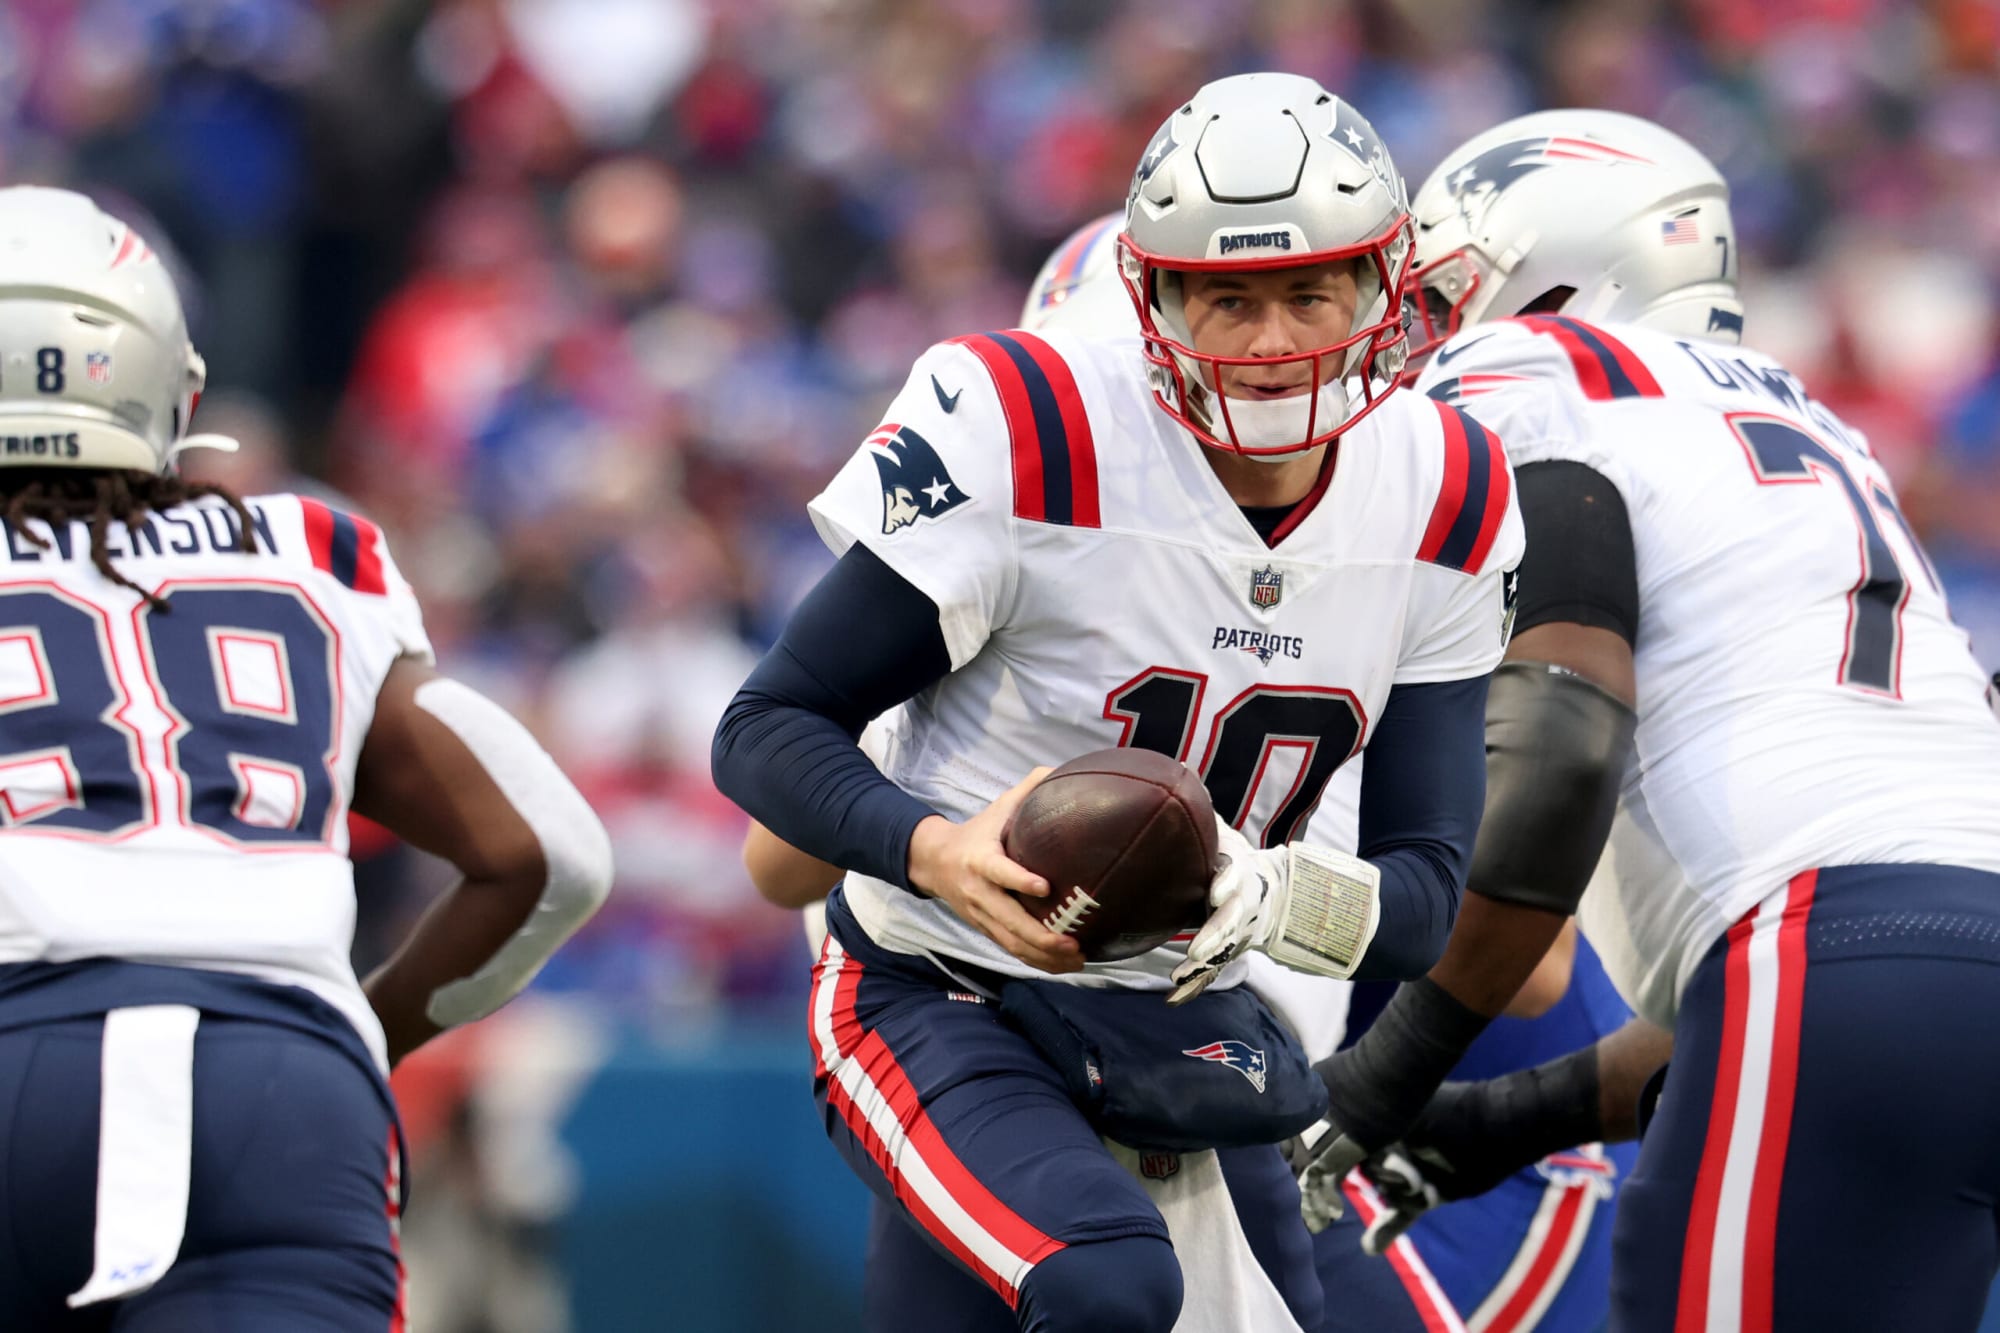 Early reviews of new Patriots offense will get fans’ hopes up